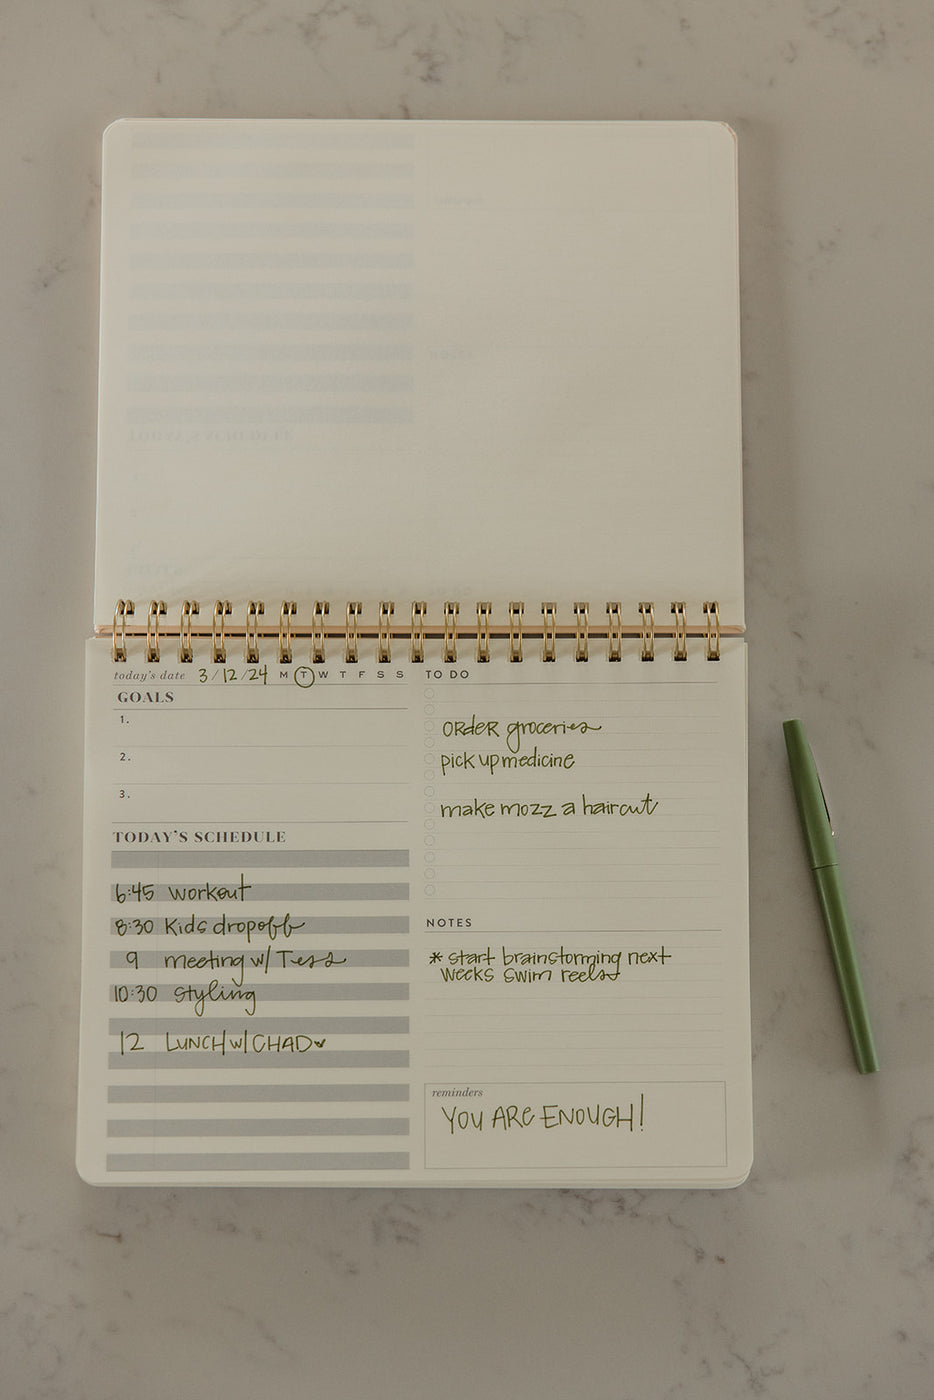 One Day at a Time Desk Planner Pad